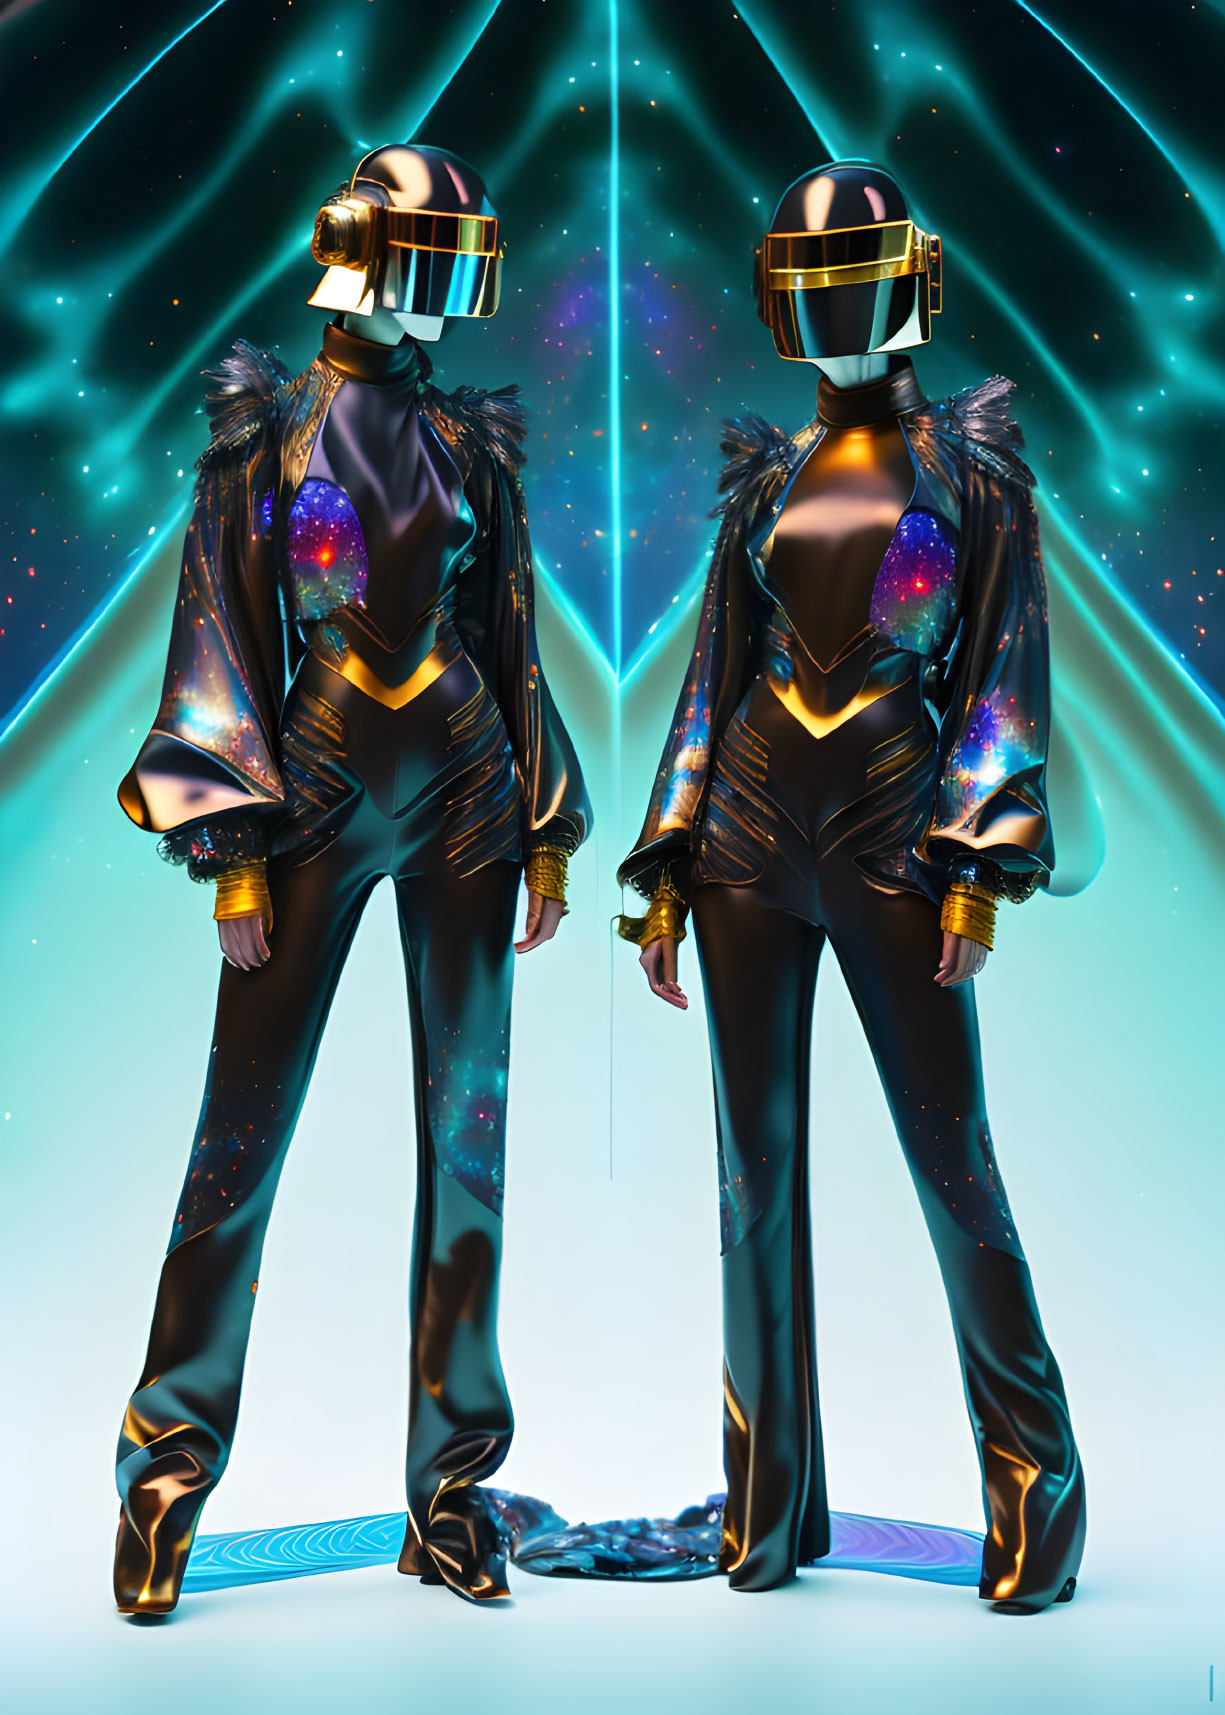 Futuristic figures in gold helmets and space suits on cosmic blue background